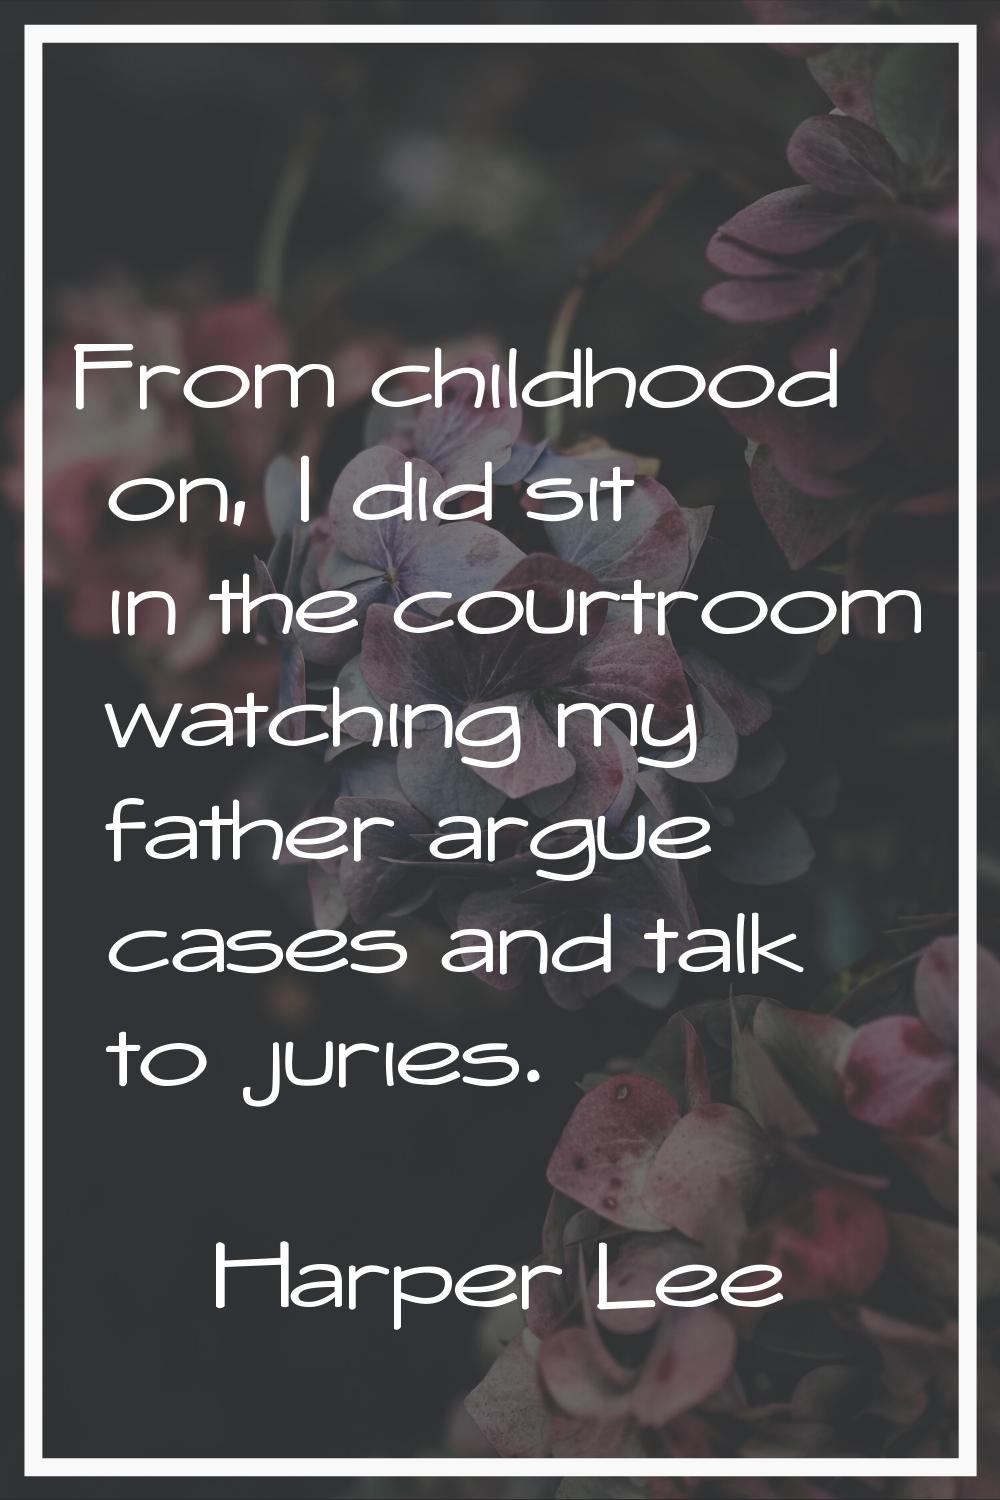 From childhood on, I did sit in the courtroom watching my father argue cases and talk to juries.